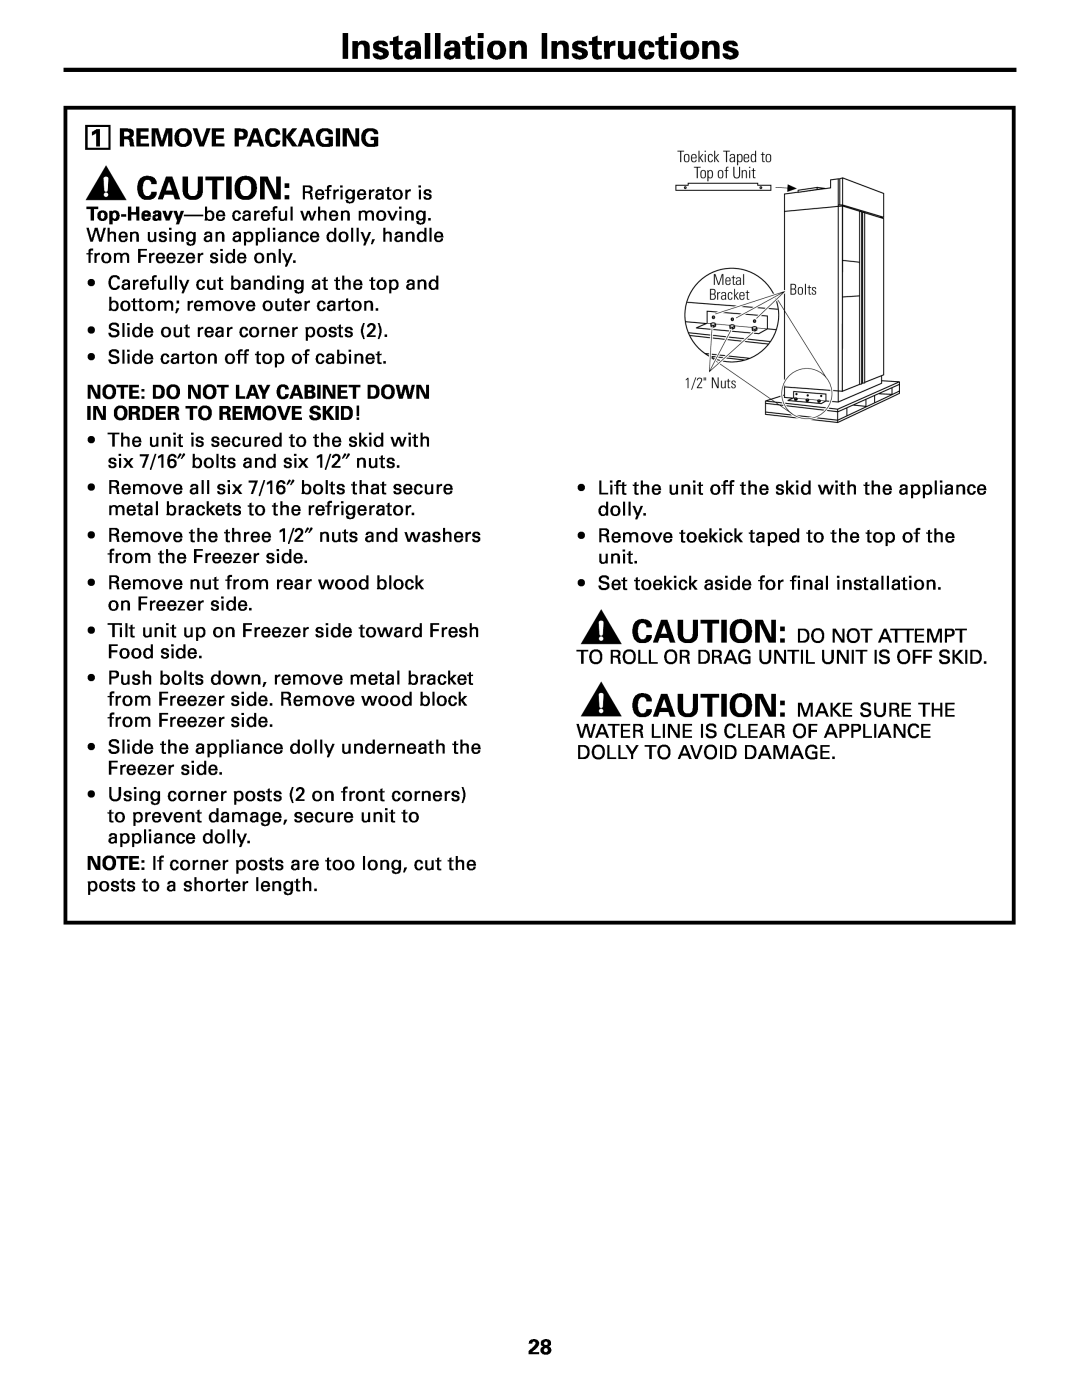 GE 42, 48 owner manual Remove Packaging, Installation Instructions, Note Do Not Lay Cabinet Down In Order To Remove Skid 